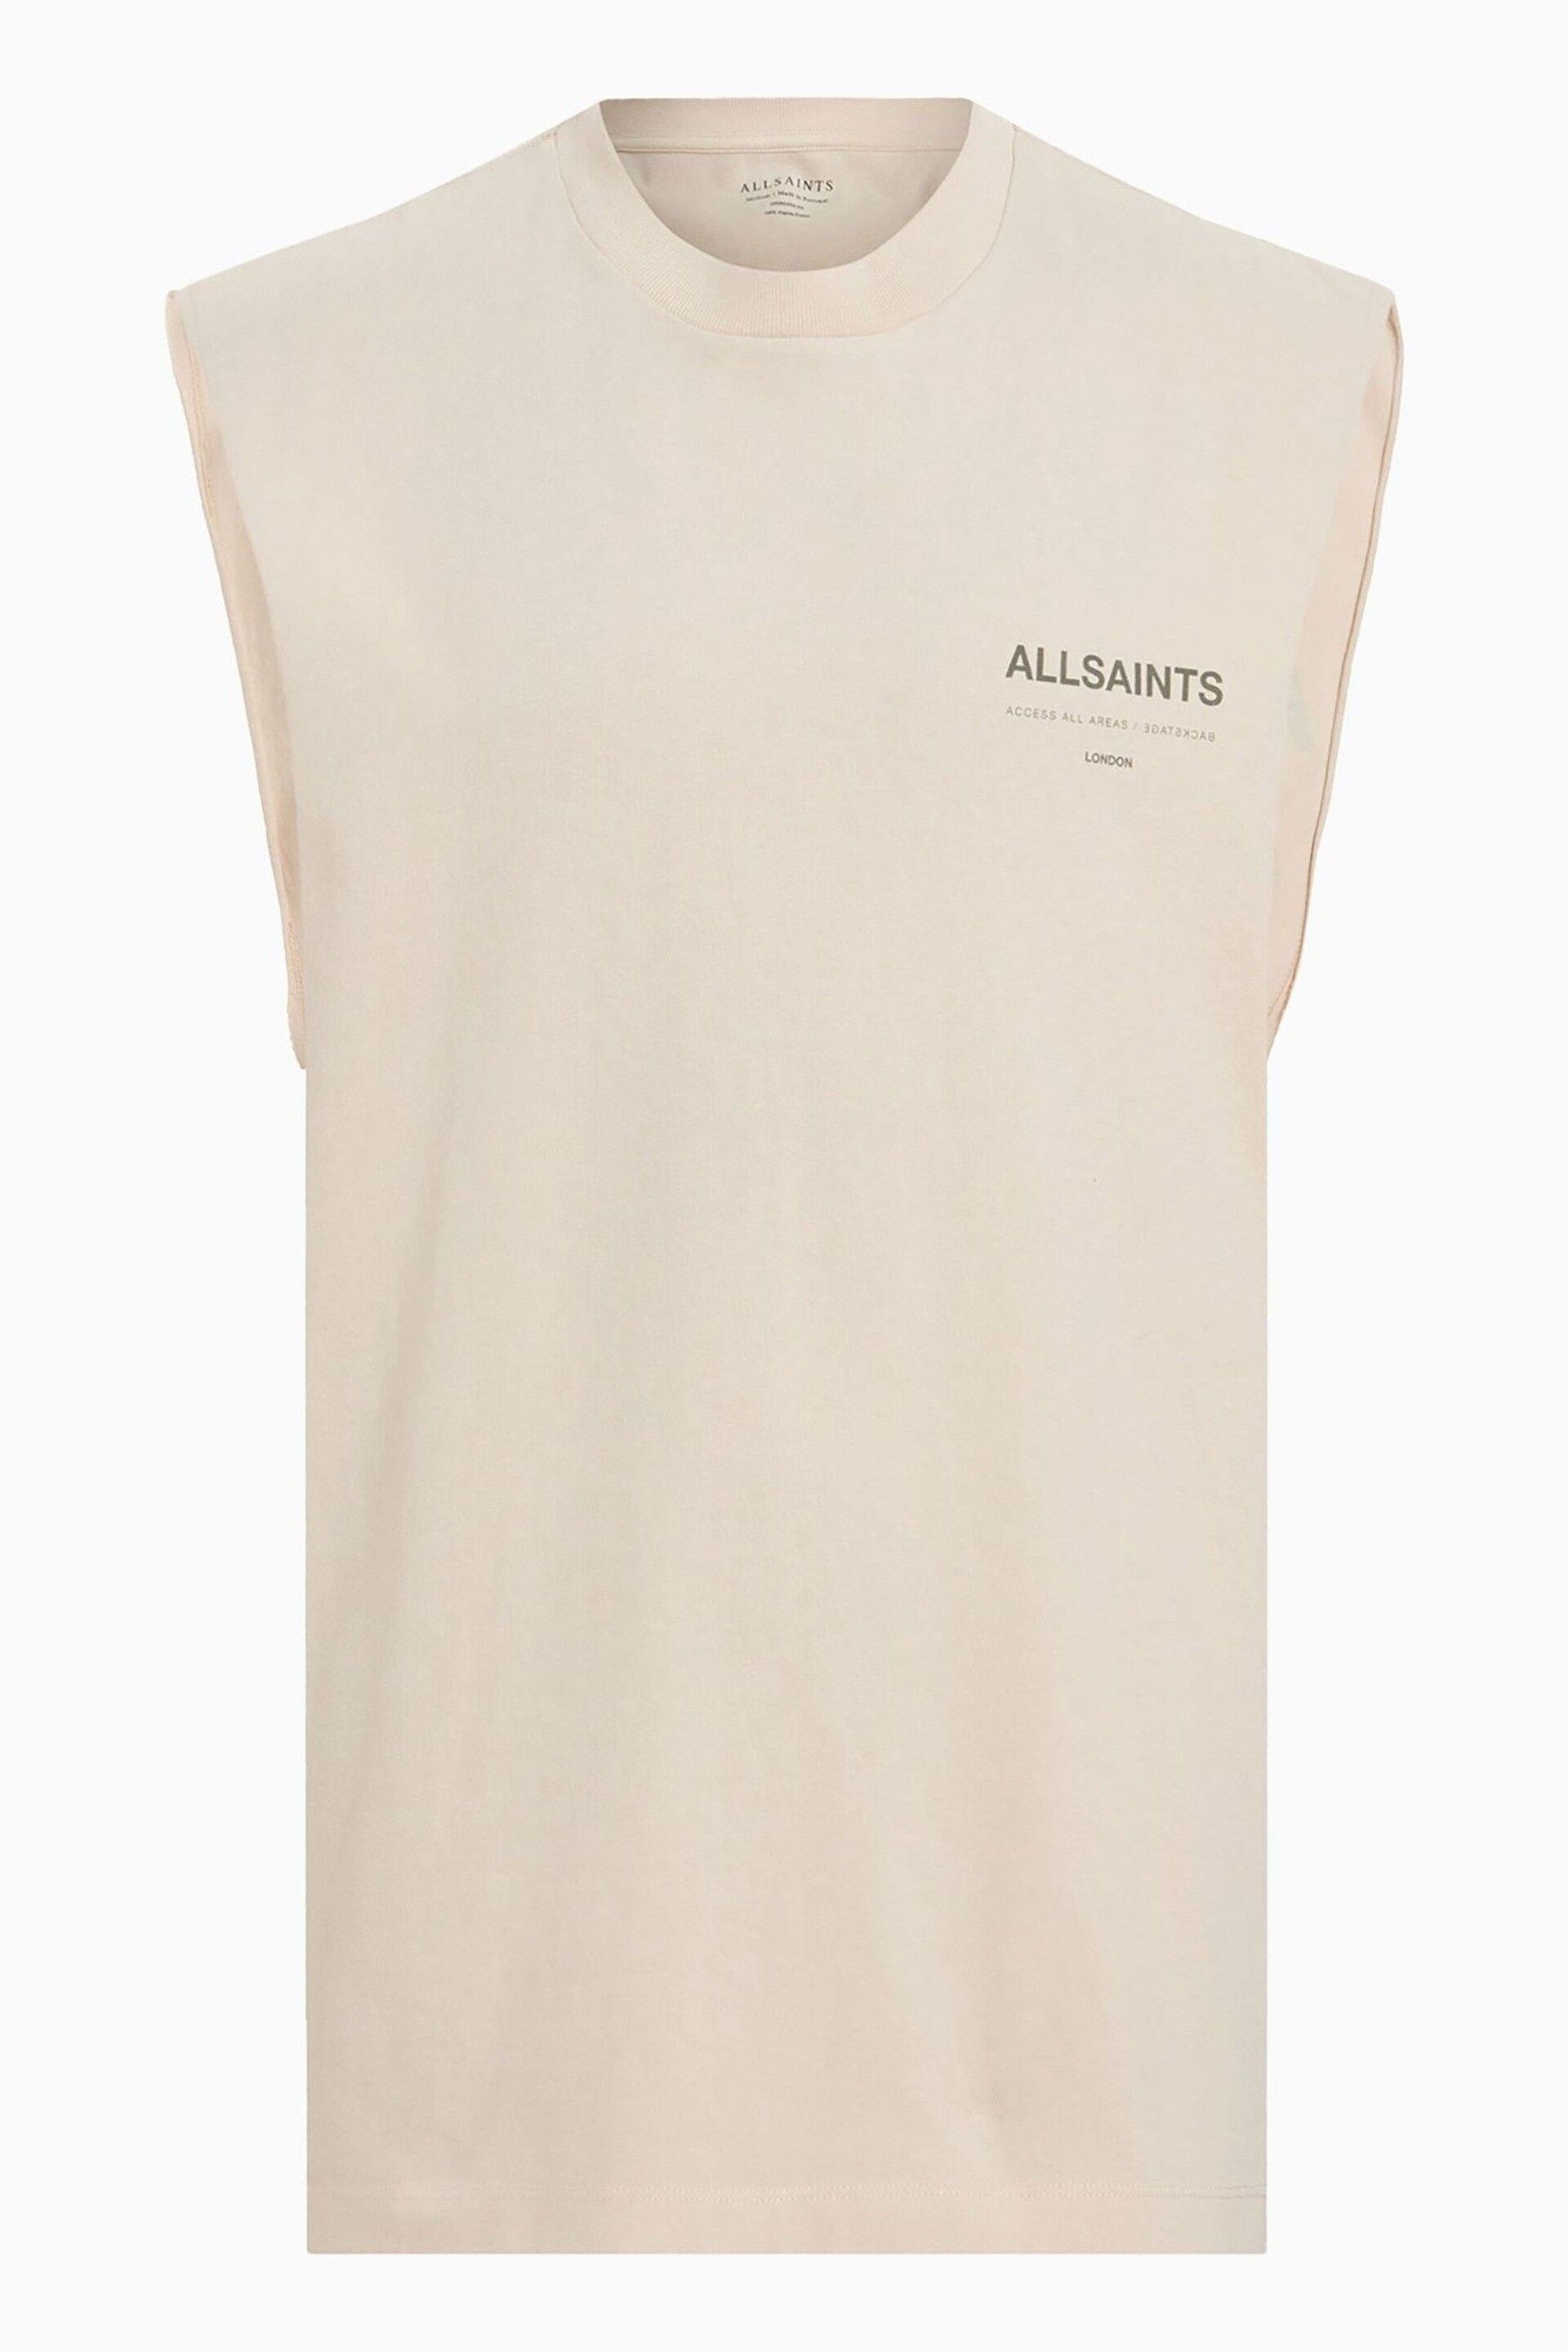 AllSaints Nude Access Short Sleeve Crew T-Shirt - Image 8 of 8